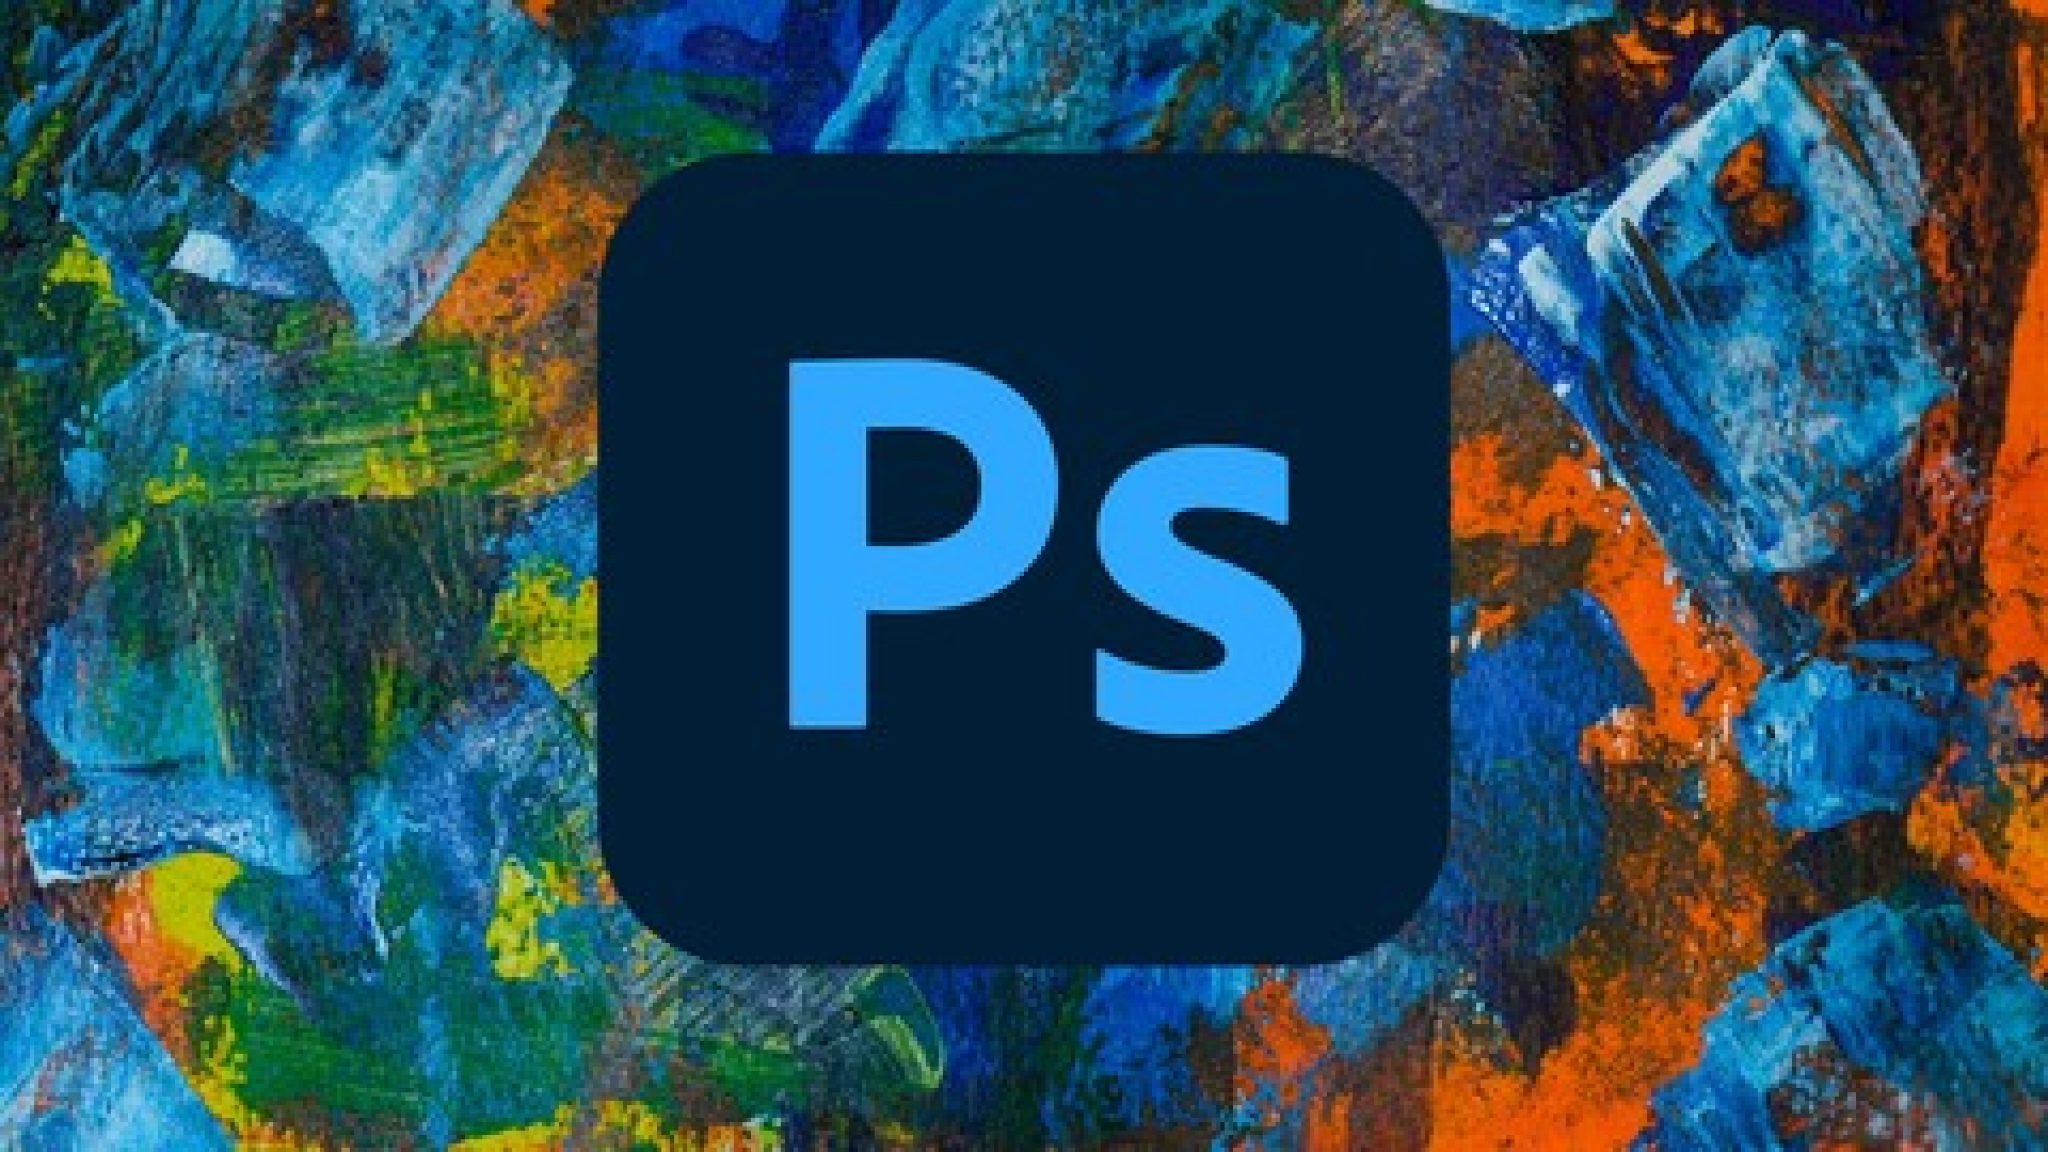 blog for photoshop cc leaning courses download